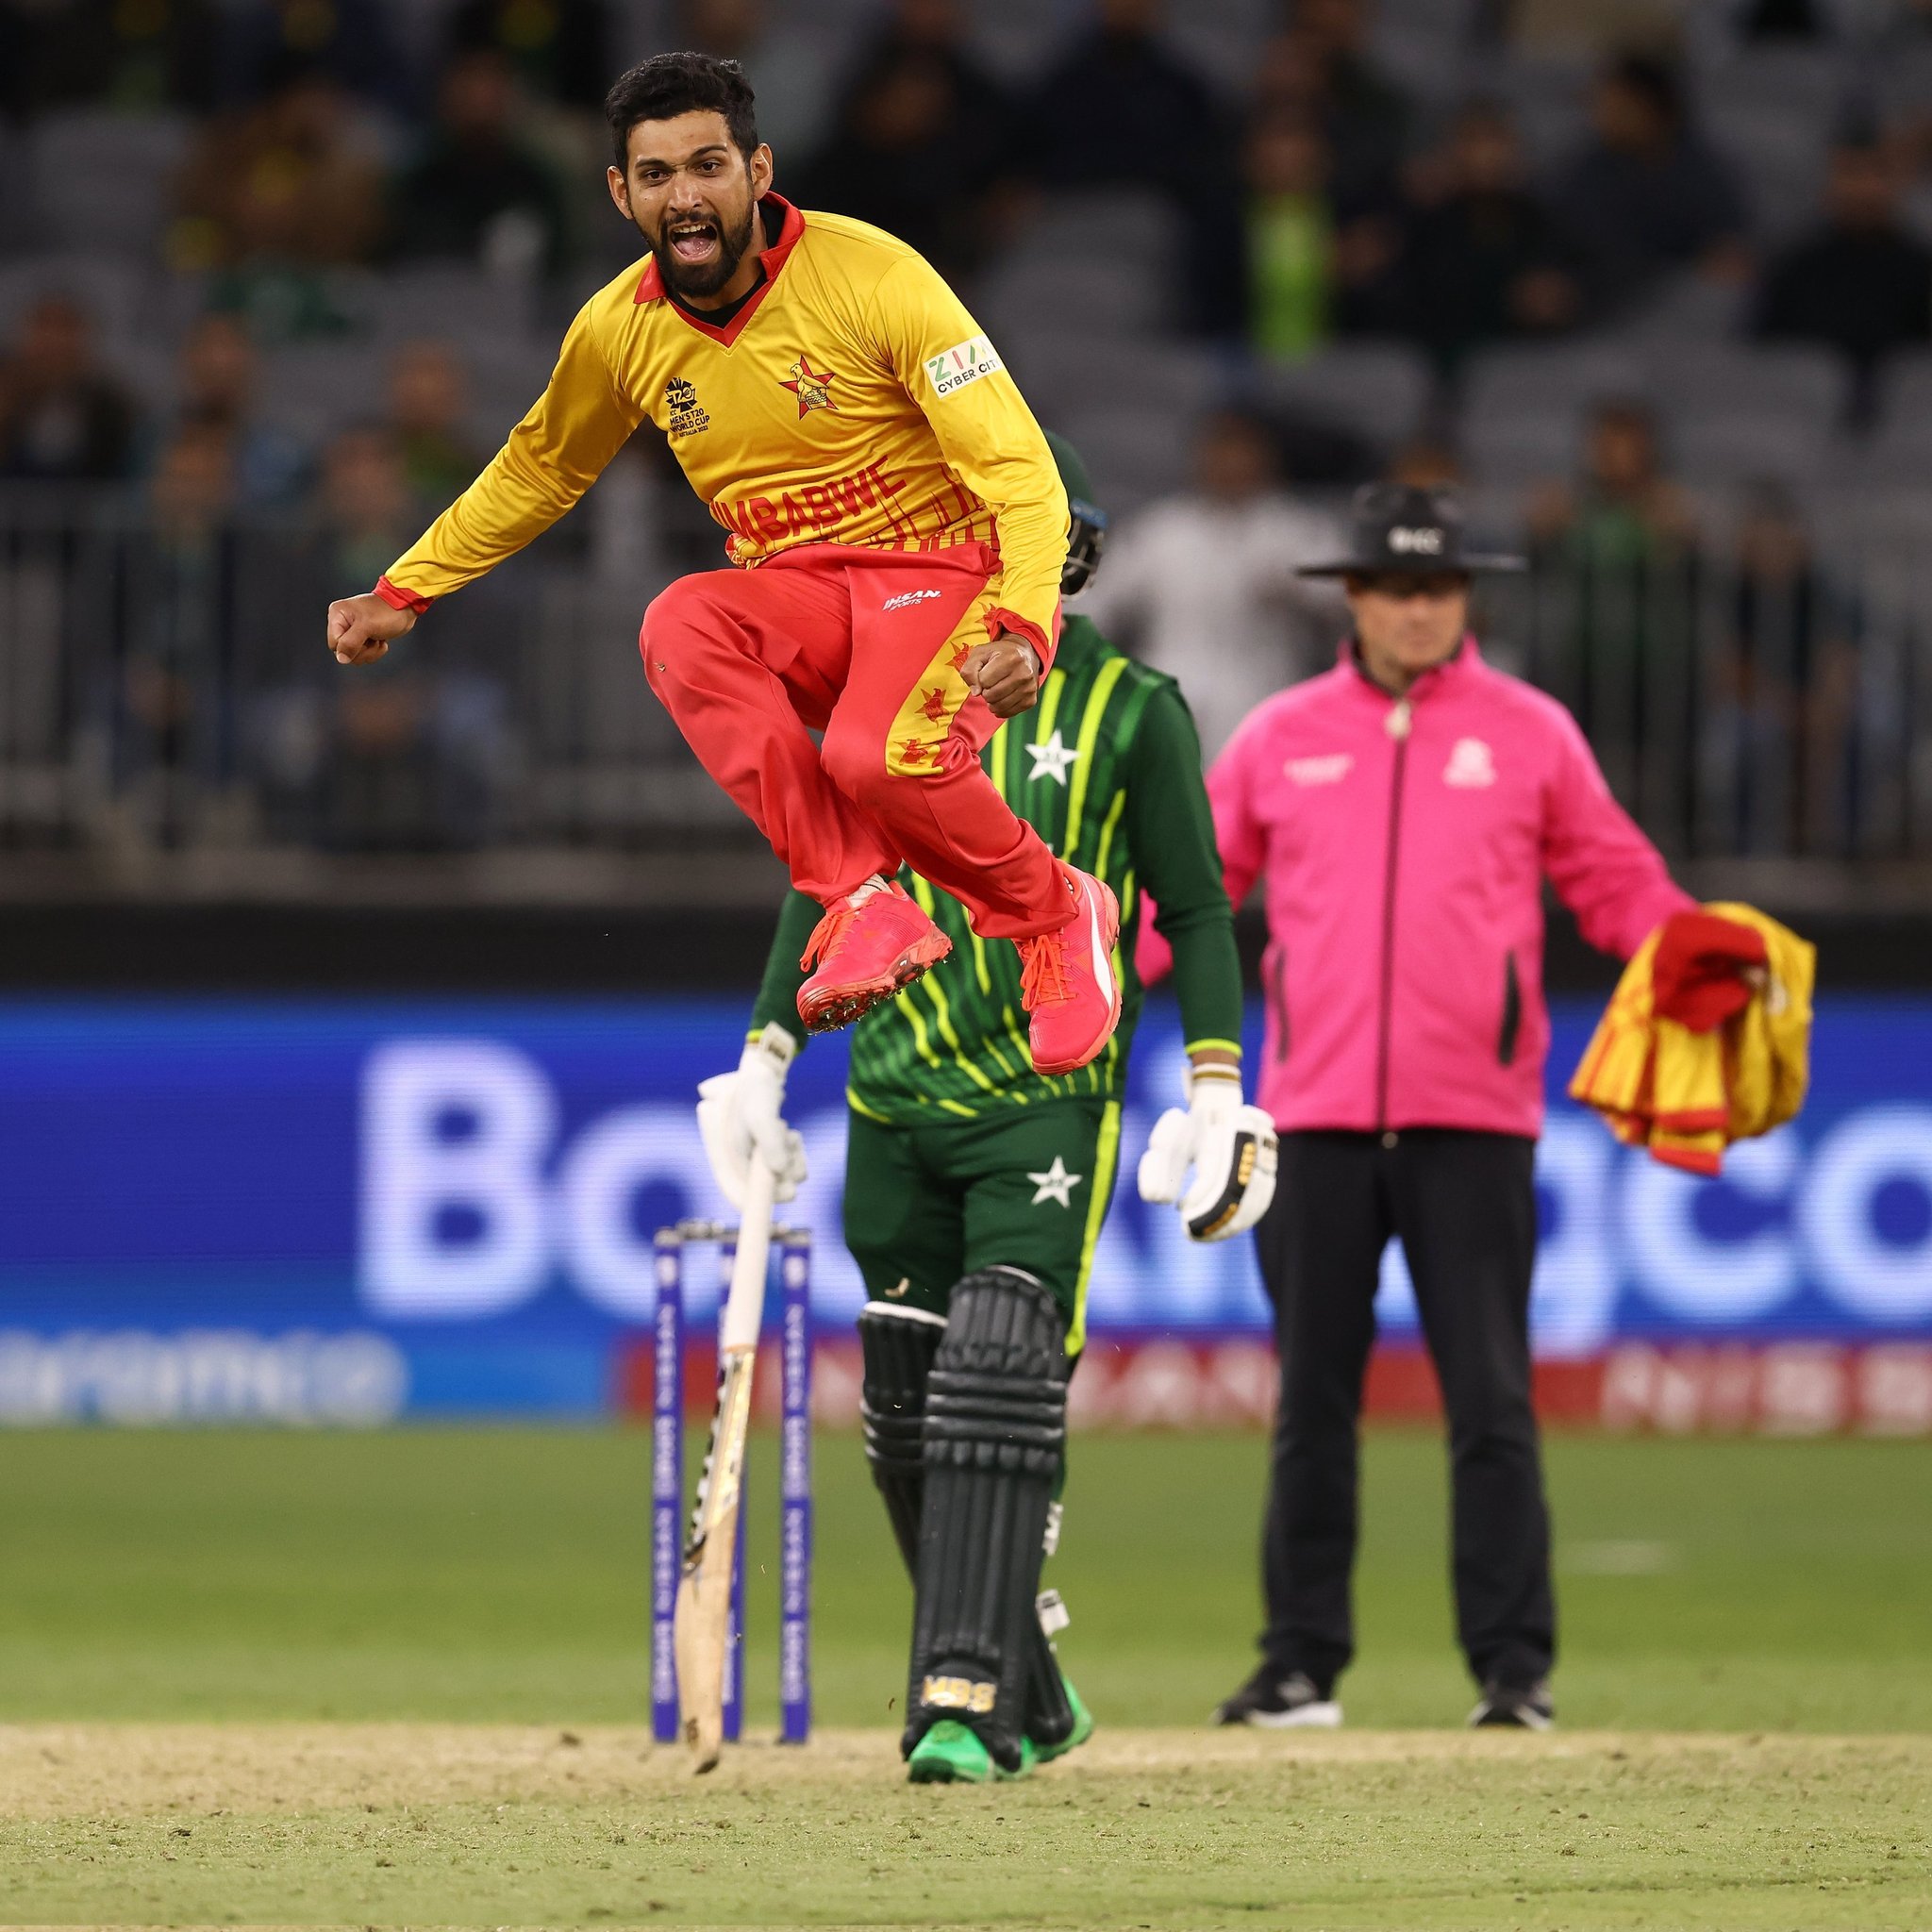 PAK vs ZIM Highlights: Architect of famous win, Sikandar Raza BREAKS DOWN in tears after powering Zimbabwe to STUNNING victory over Pakistan - WATCH Video